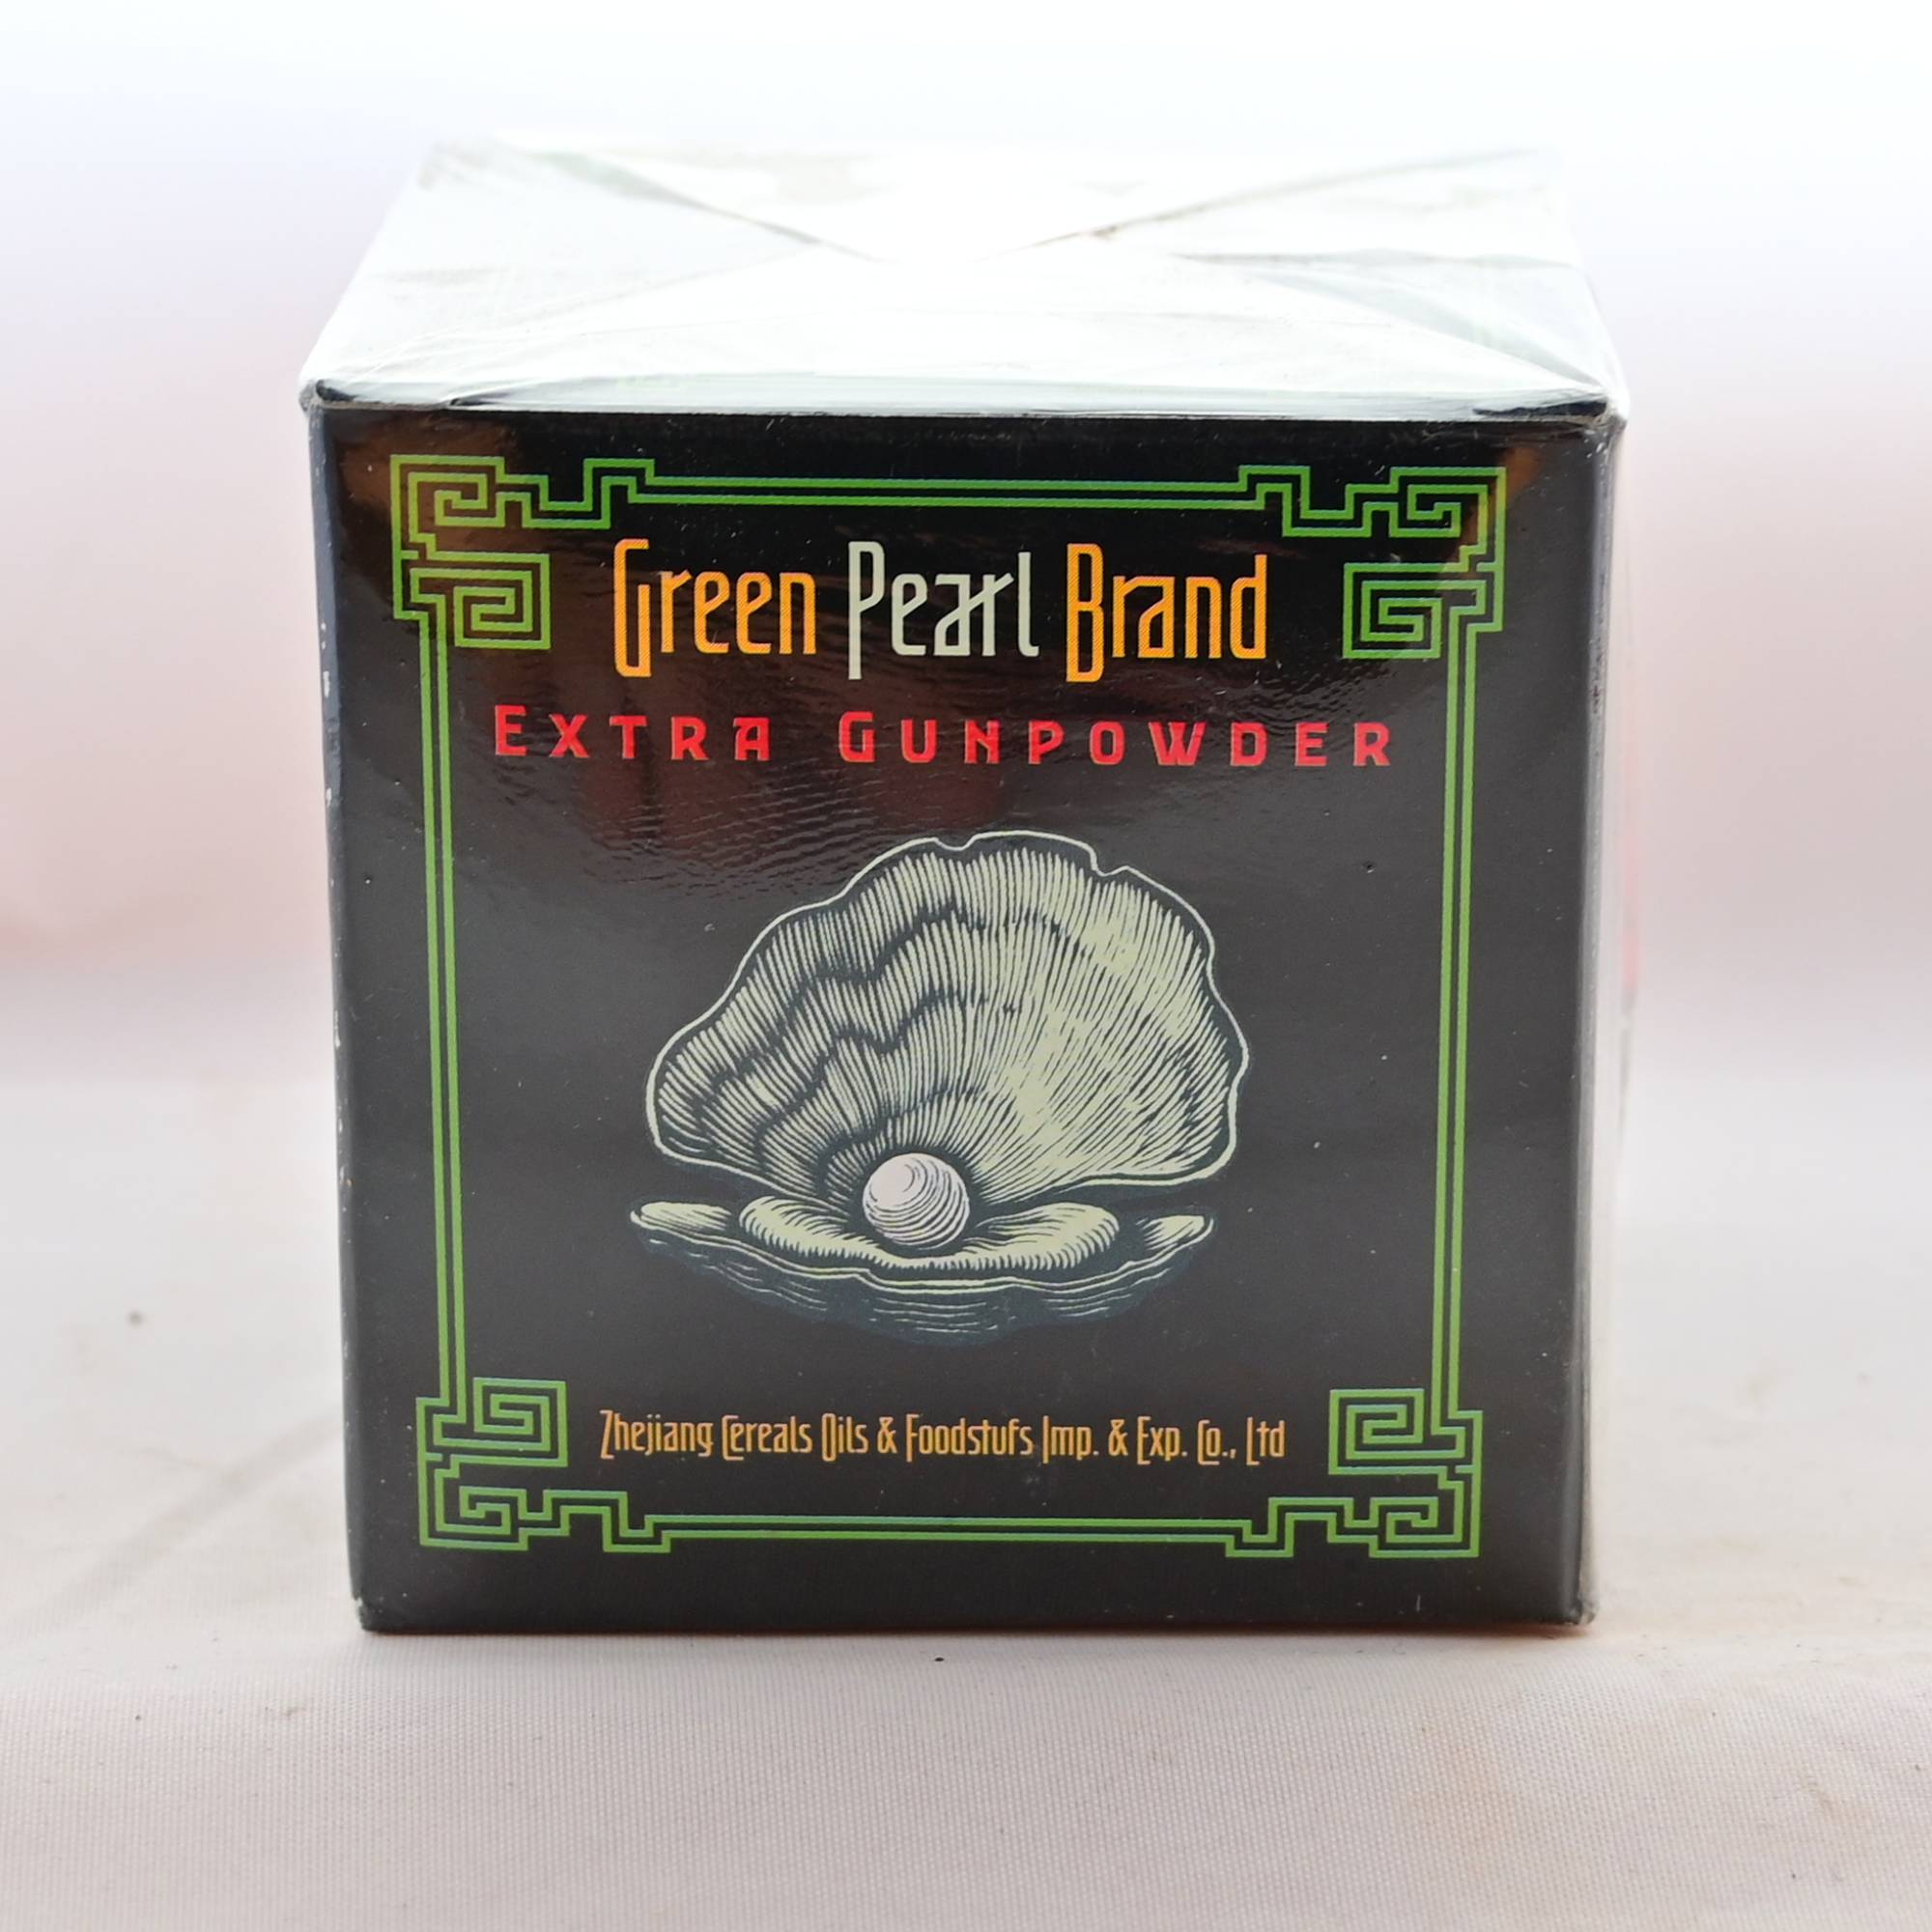 A tea box with text: Green Pearl Brand Extra Gunpowder. There is a line-art oyster with pearl in the center. It is wrapped in plastic.